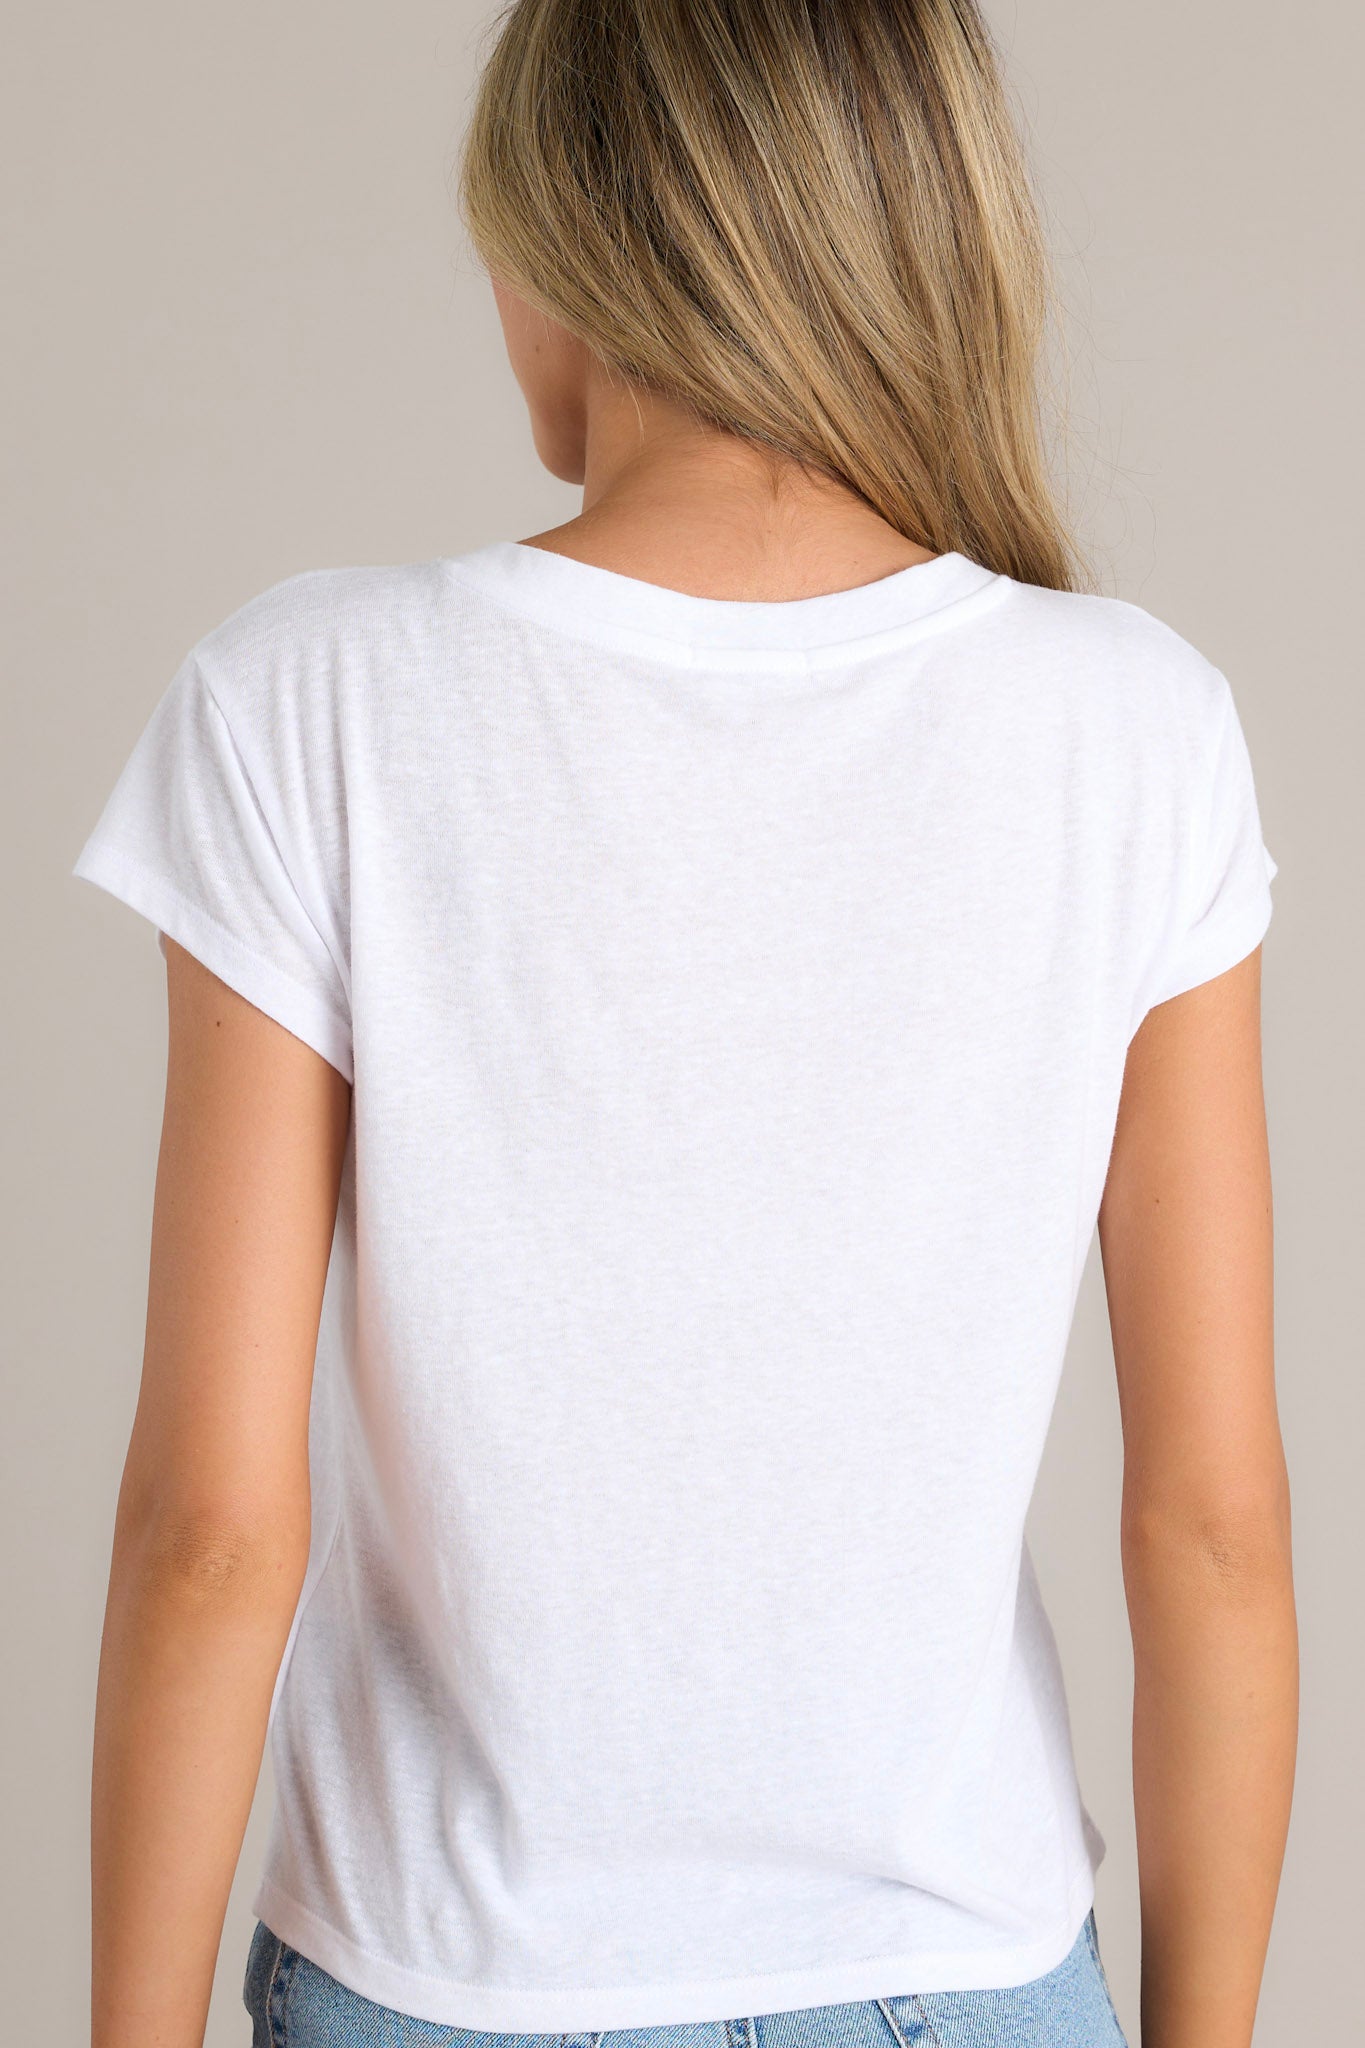 Back view of the neckline of this white tee that features a v-neckline, a soft & lightweight fabric, a versatile design, and loose short sleeves.